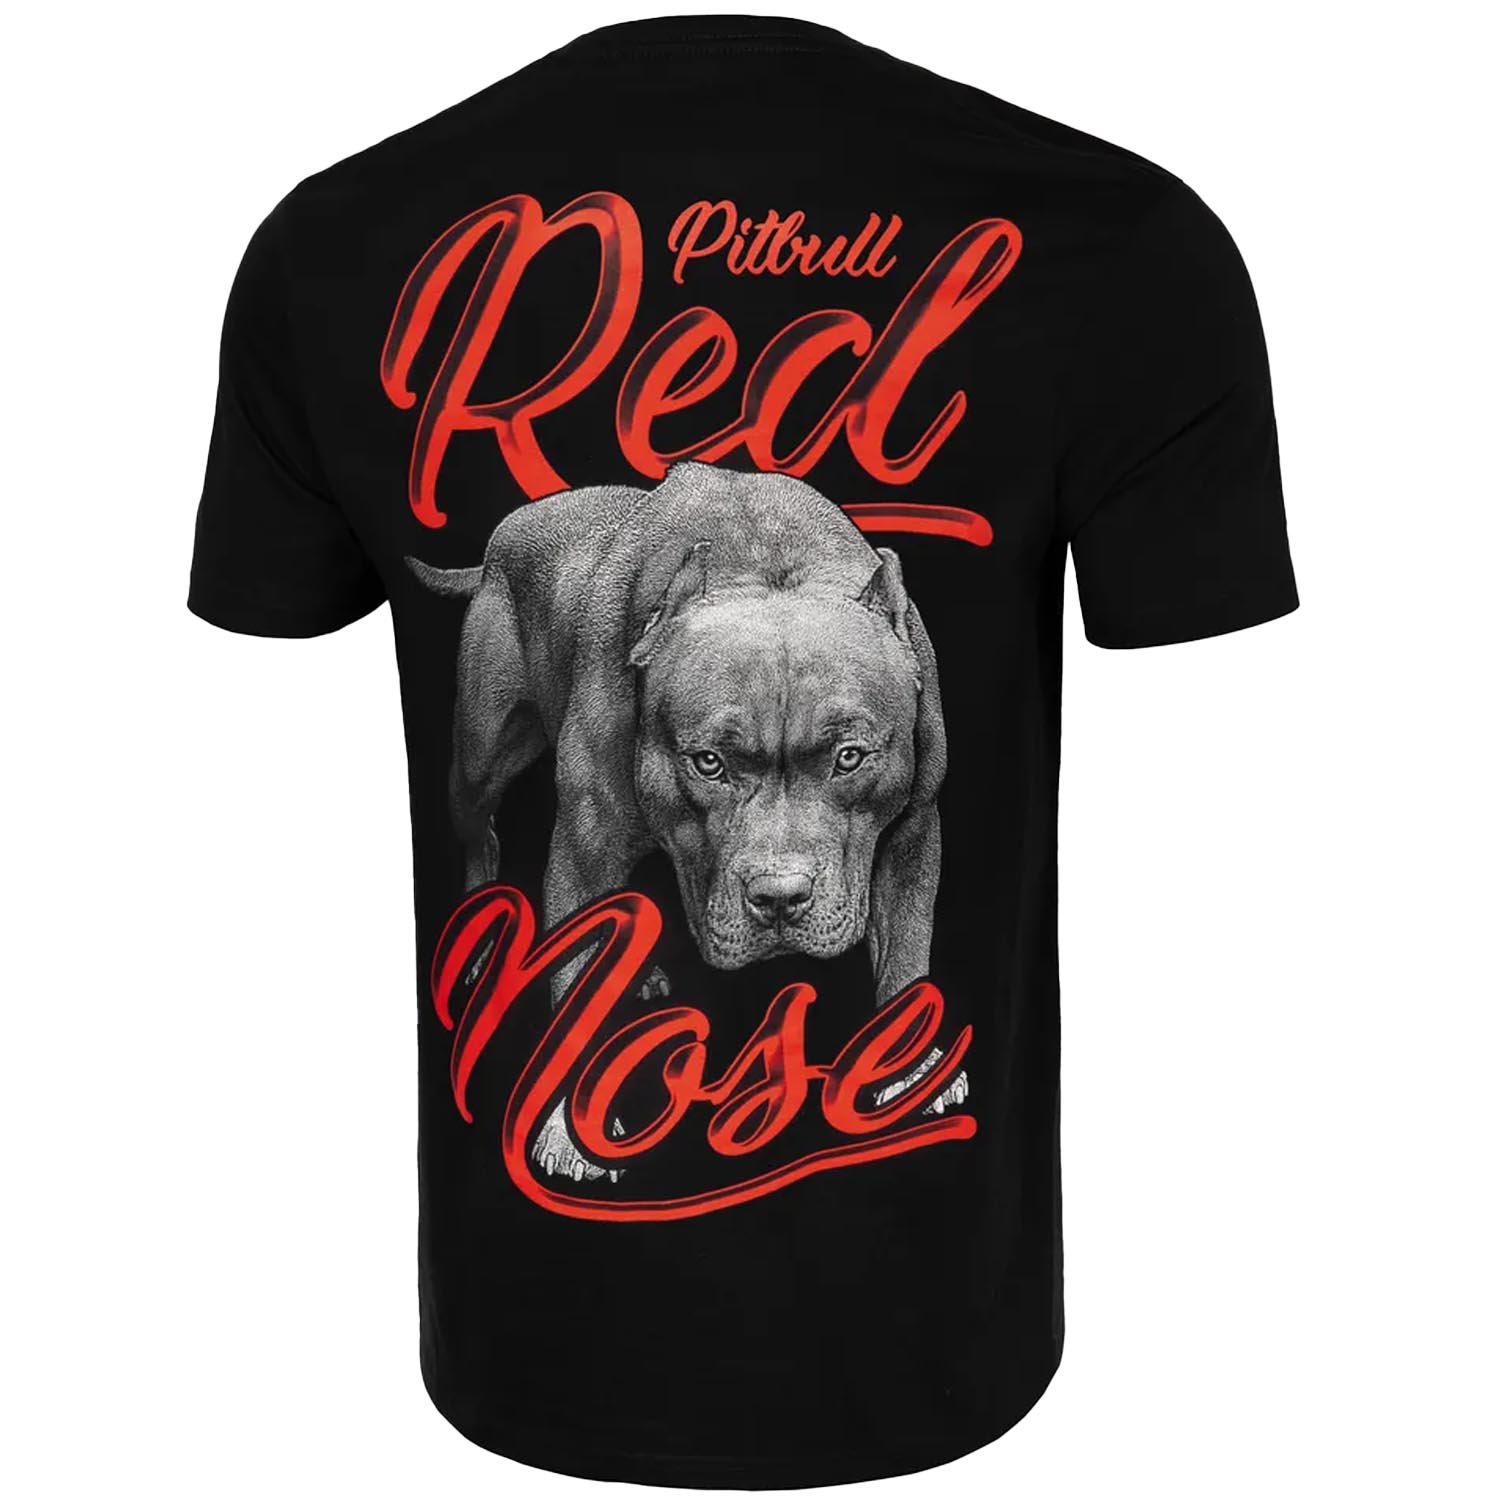 Pit Bull West Coast T-Shirt, Red Nose 23, schwarz-rot